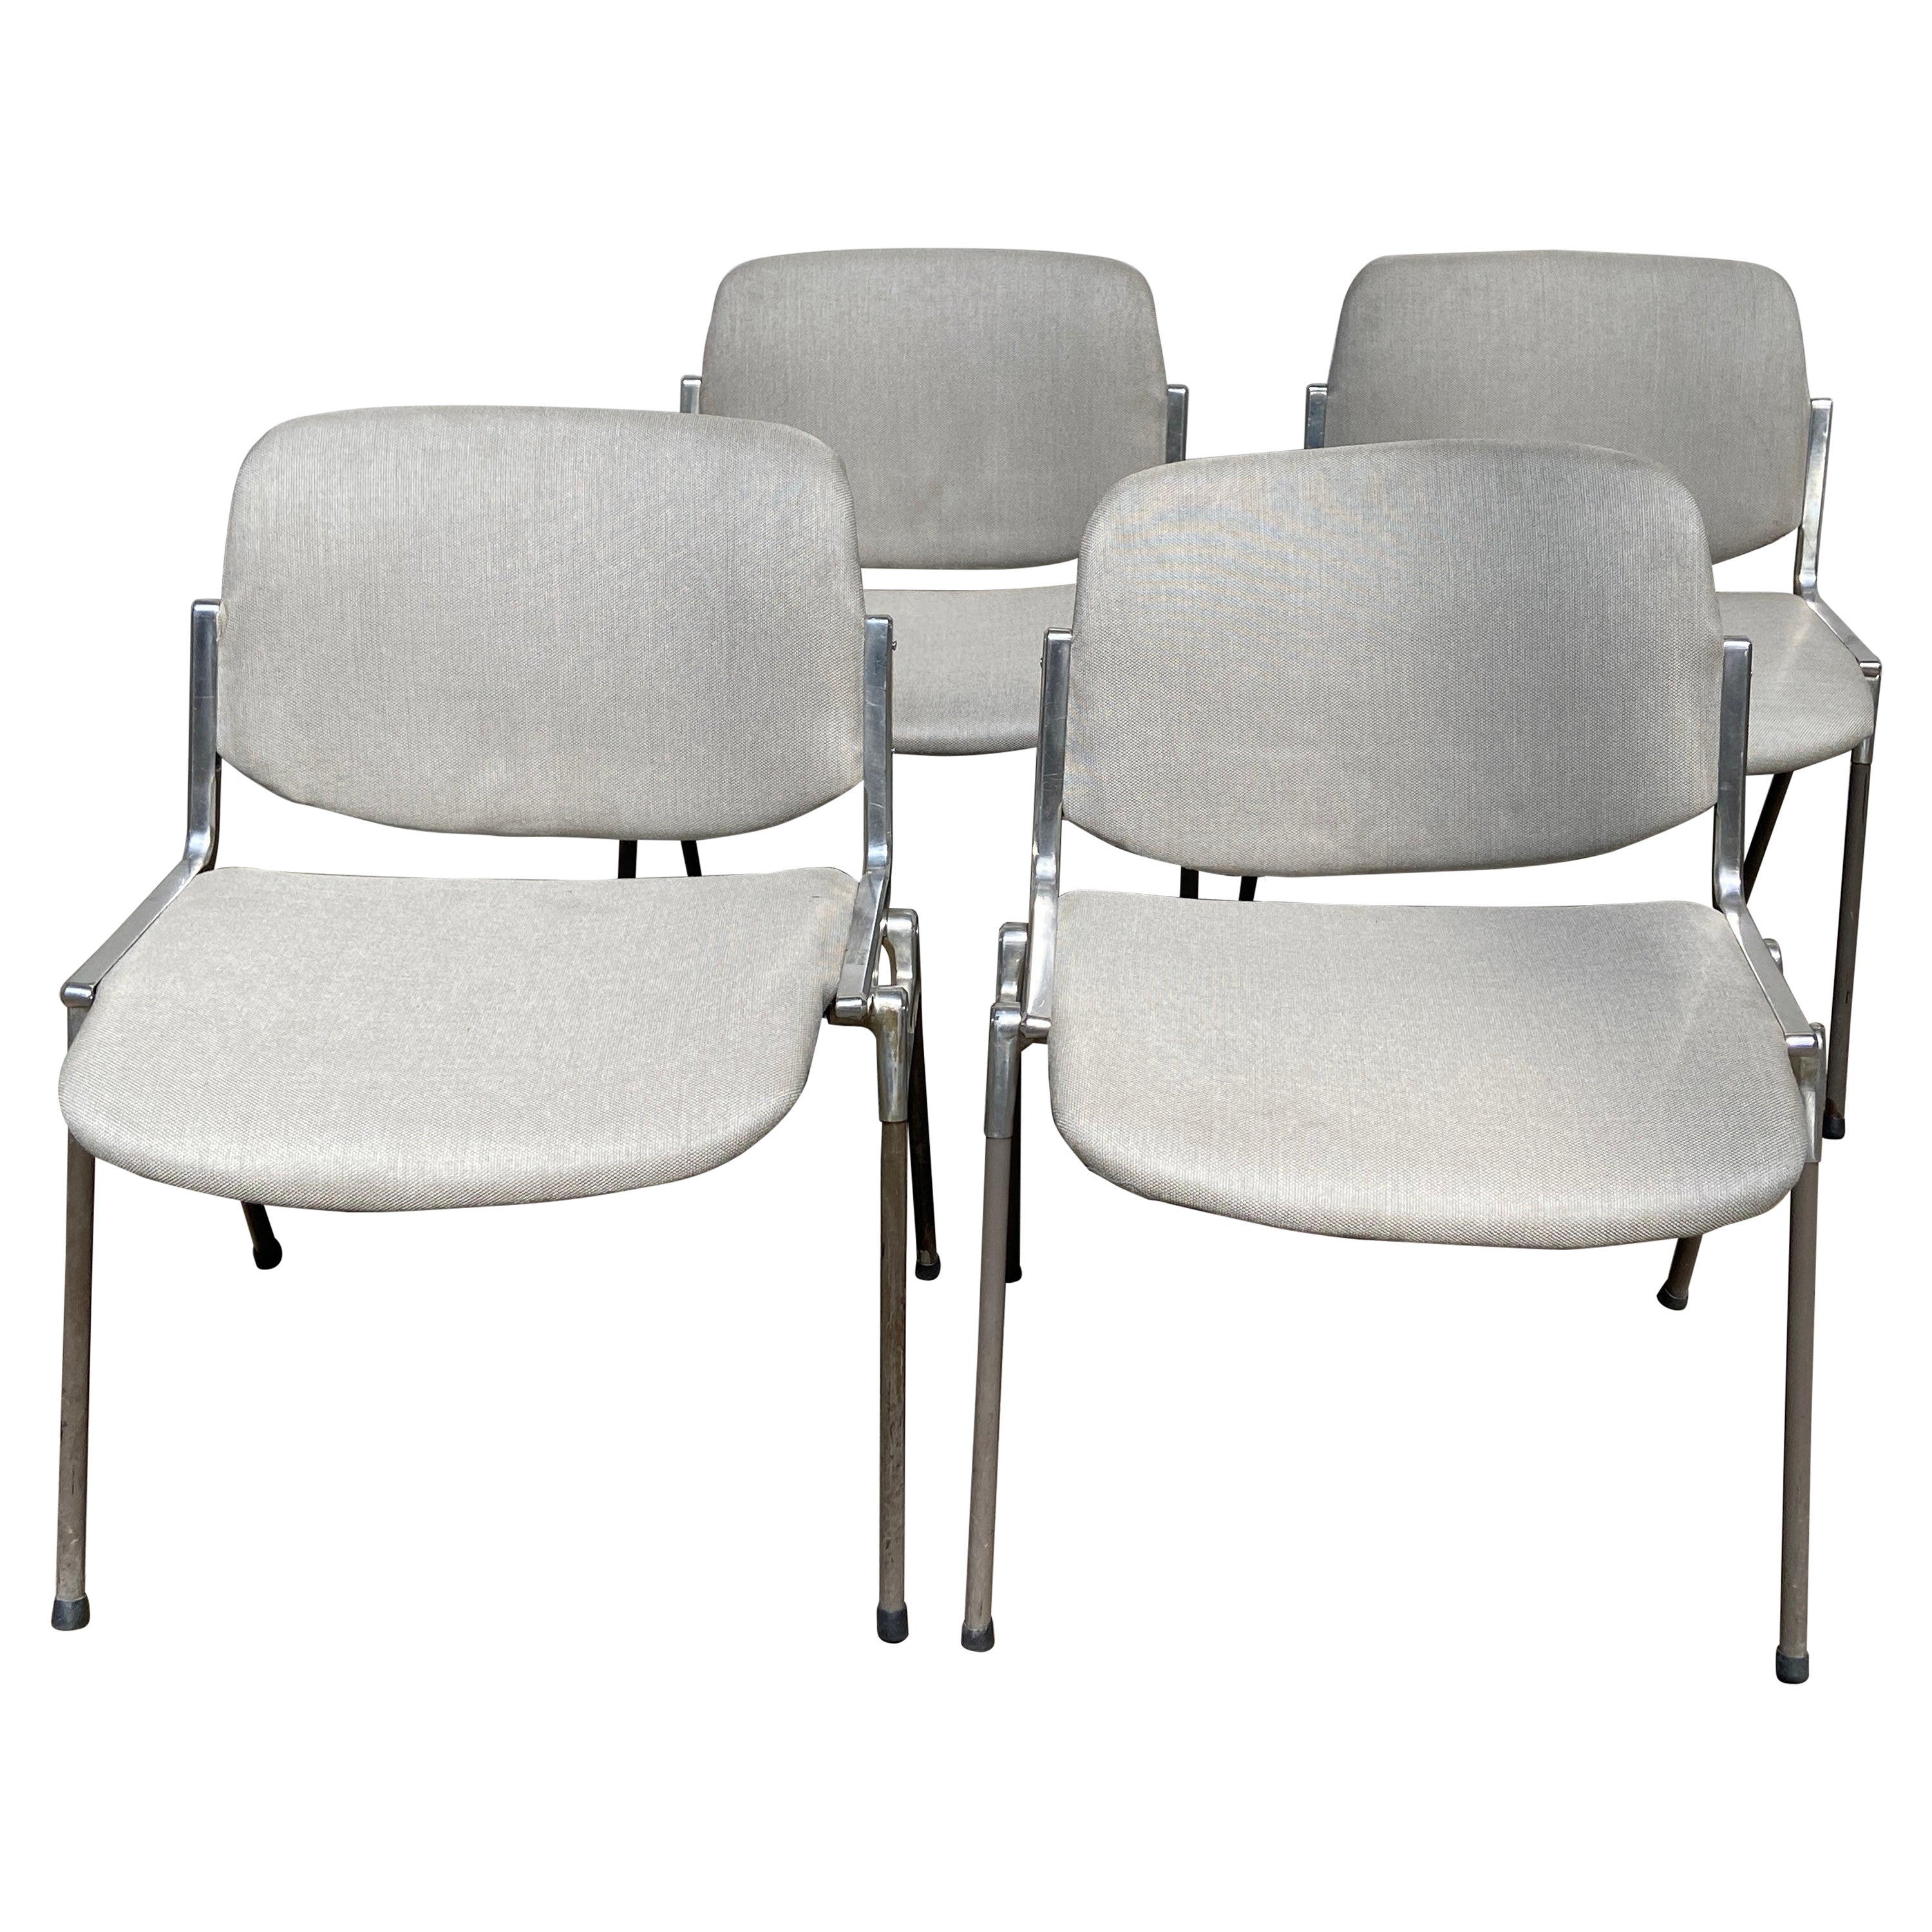 Mid-Century Modern Italian Set of Four Dsc 106 Chairs by Anonima Castelli, 1960s For Sale